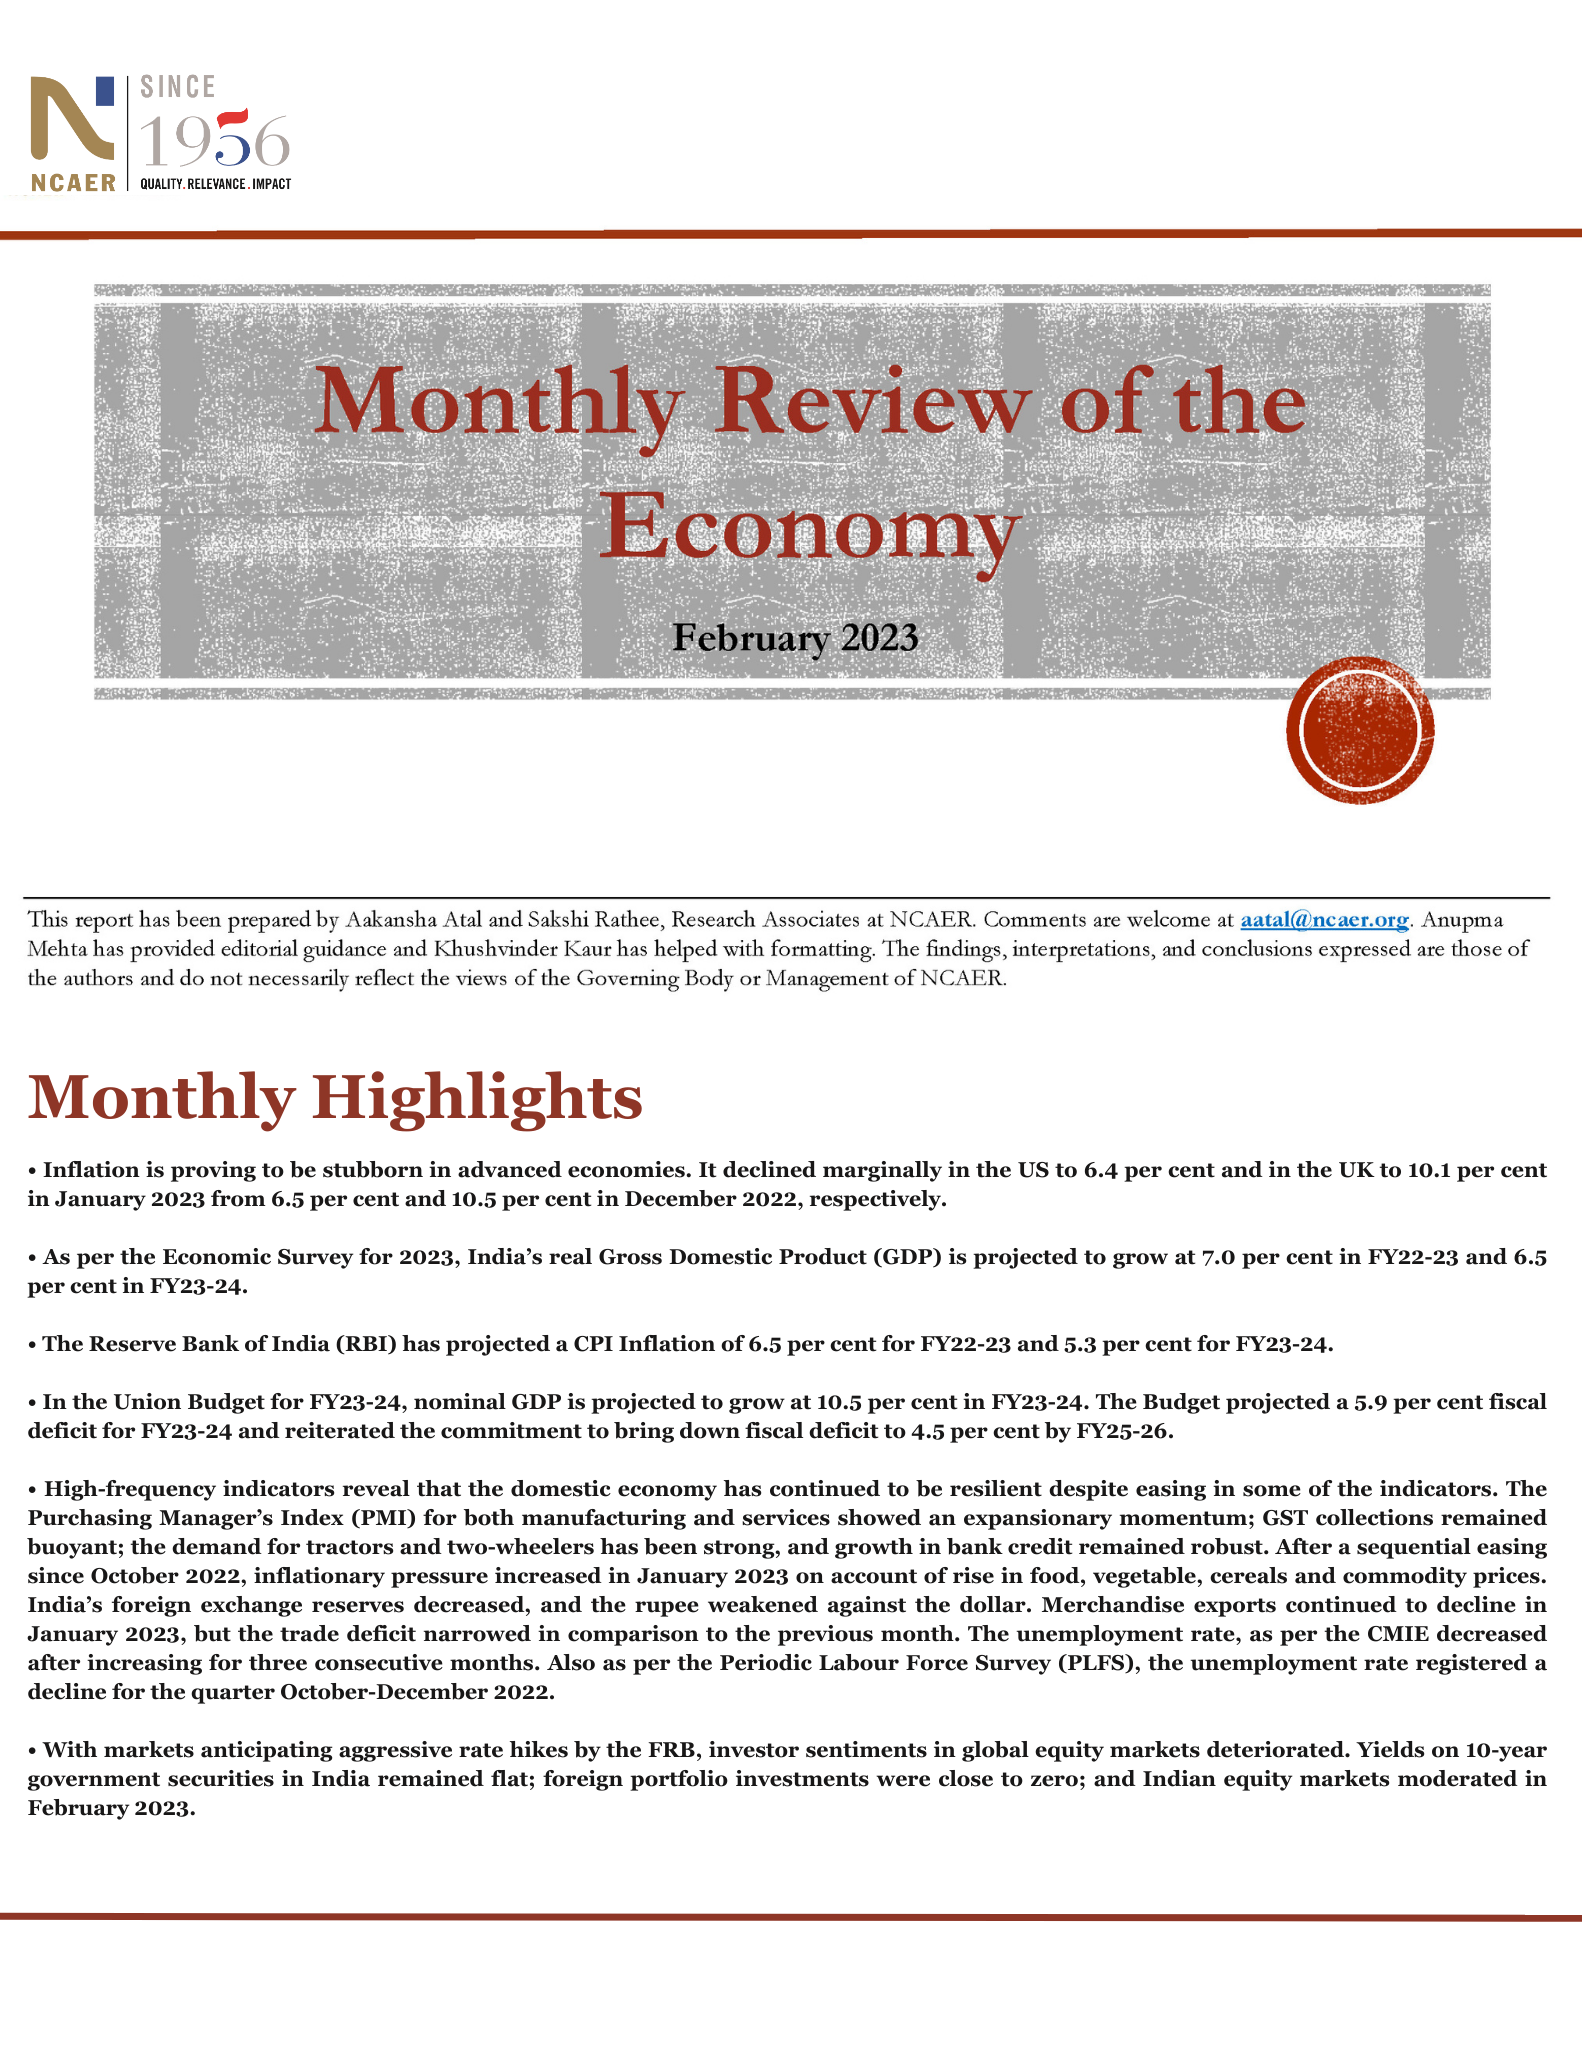 Monthly Review of the Economy: February 2023